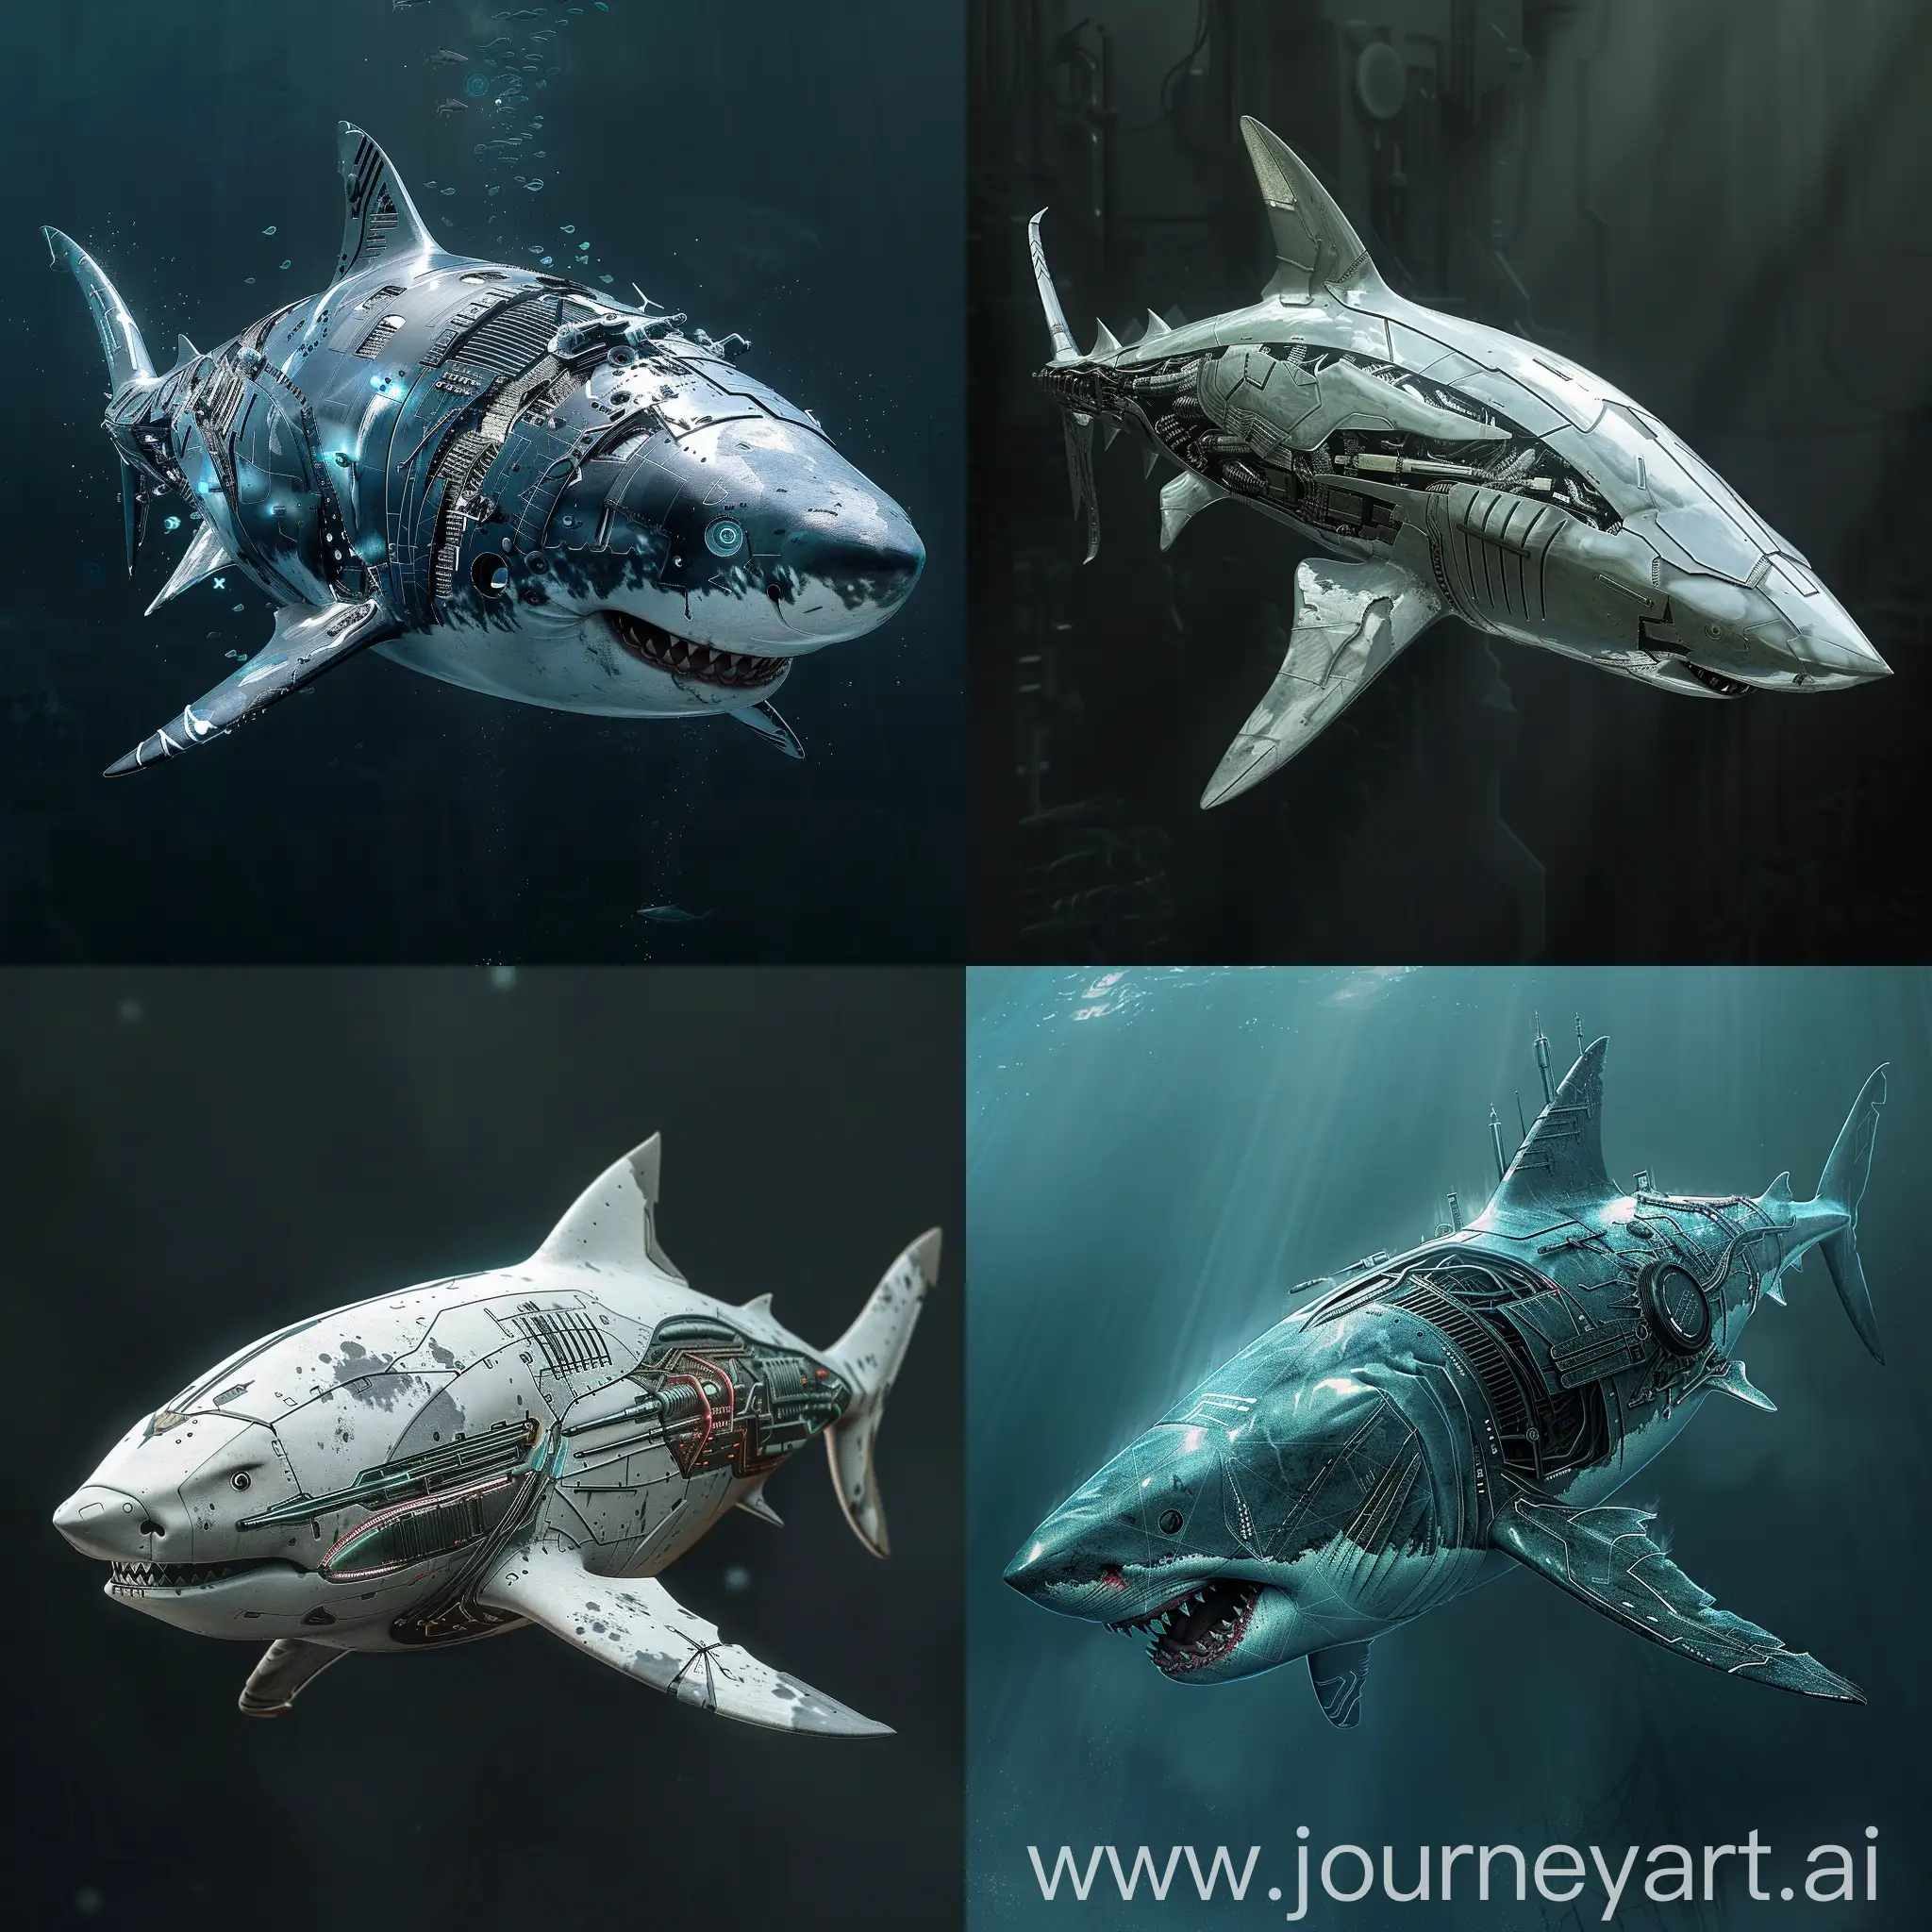 Futuristic white shark, Prey-Locating Nanobots (Minsky), Electromagnetic Cartilage (Sharknado 2: The Second One), Echolocation Cannon (A Quiet Place), Adaptive Camouflage Skin (Predators), Neural Interface (The Matrix), Bio-Regenerative Tissue (Ex Machina), Internal Sonar Mapping (Sphere), Heat-Seeking Tentacles (Mimic), Symbiotic Bioluminescent Bacteria (Avatar), Electroreception Boost (Sense8), Kinetic Camouflage Plating (Primer), Magnetic Fin Propulsion (Turbo Kid), Hydrodynamic Ramjet Gills (The Fountain), Integrated Weaponized Remoras (Sunshine), Bioluminescent Warning Stripes (Tucker & Dale vs Evil), Multi-Sensory Snout (Mandy), Retractable Drill Teeth (Upgrade), Hydrodynamic Noise Cancelling (Sound of My Voice), Symbiotic Bioluminescent Crustaceans (Spring), Hypnotic Eye Patterns (Annihilation), unreal engine 5, 4K-UHD, 8K-UHD, super-hi vision, soft shadows, soft reflections, soft lighting, soft light, soft details, hard shadows, hard reflections, hard lighting, hard light, hard details --stylize 1000